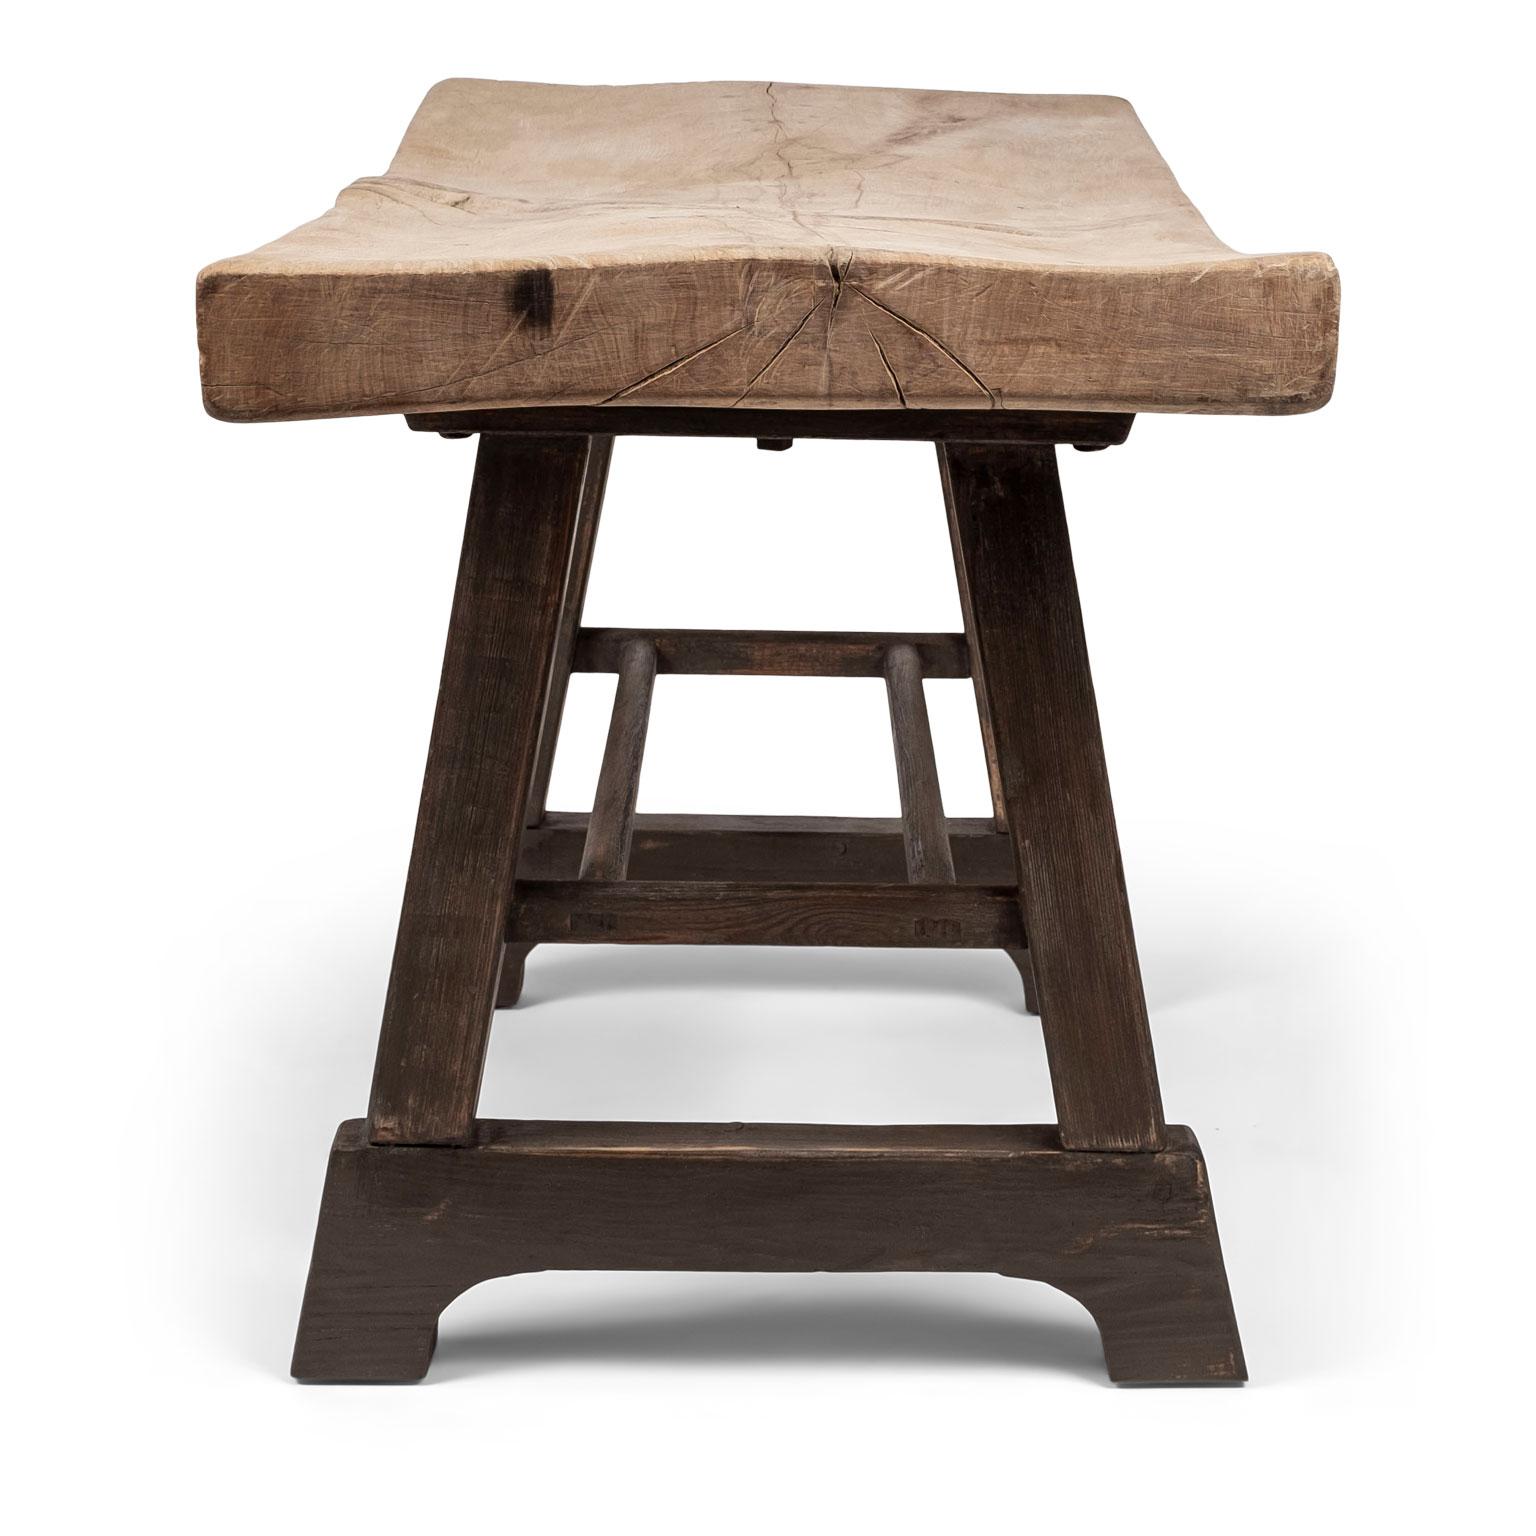 English butchers block table from a country house in Leicestershire. Constructed in the late 19th century with large, wide top made from one single solid piece of scrubbed pale sycamore, worn by a century of steady use to varying degrees of